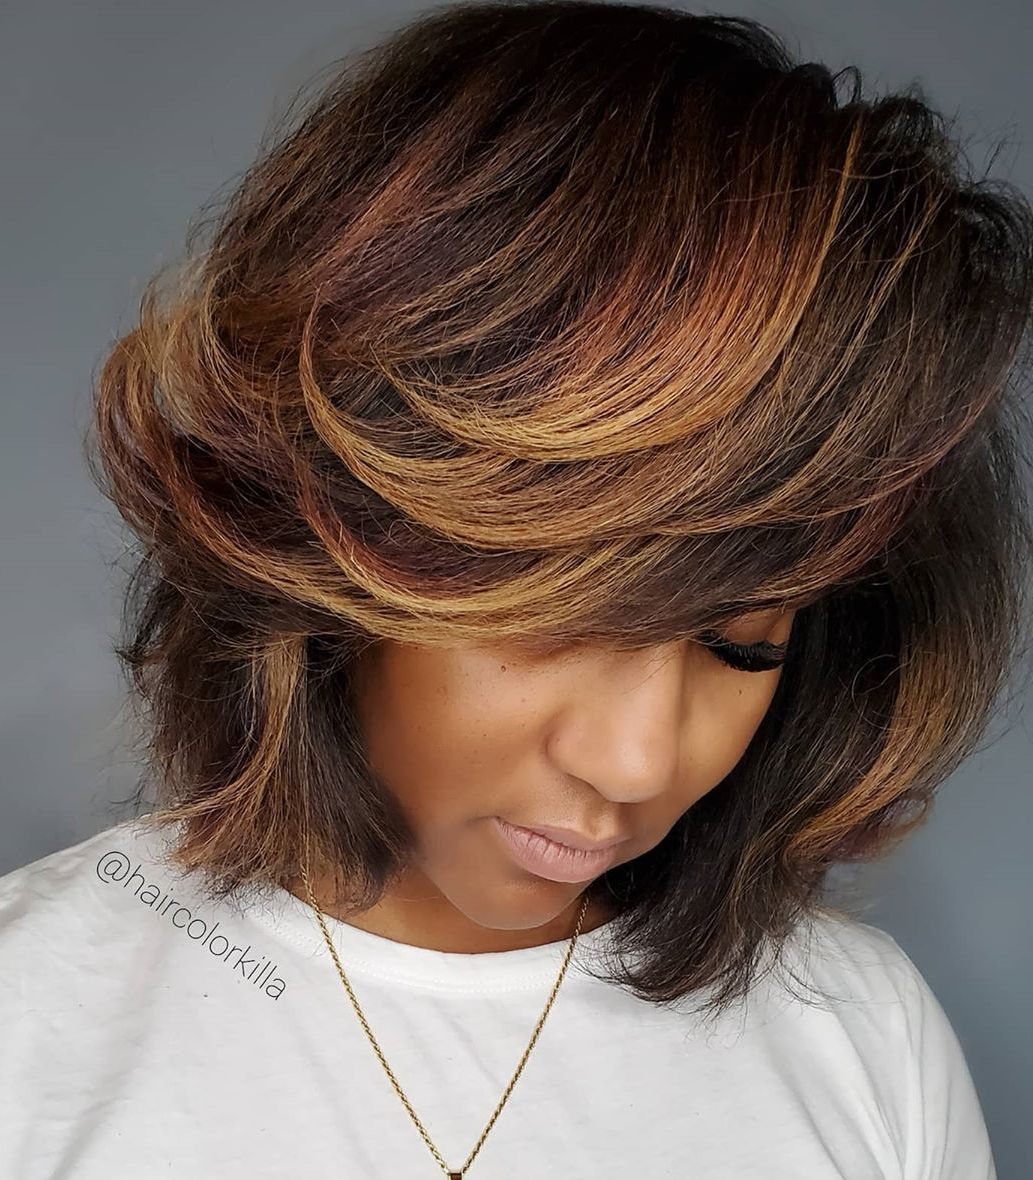 21 Hair Color Ideas for Dark Skin Tones to Try This Year